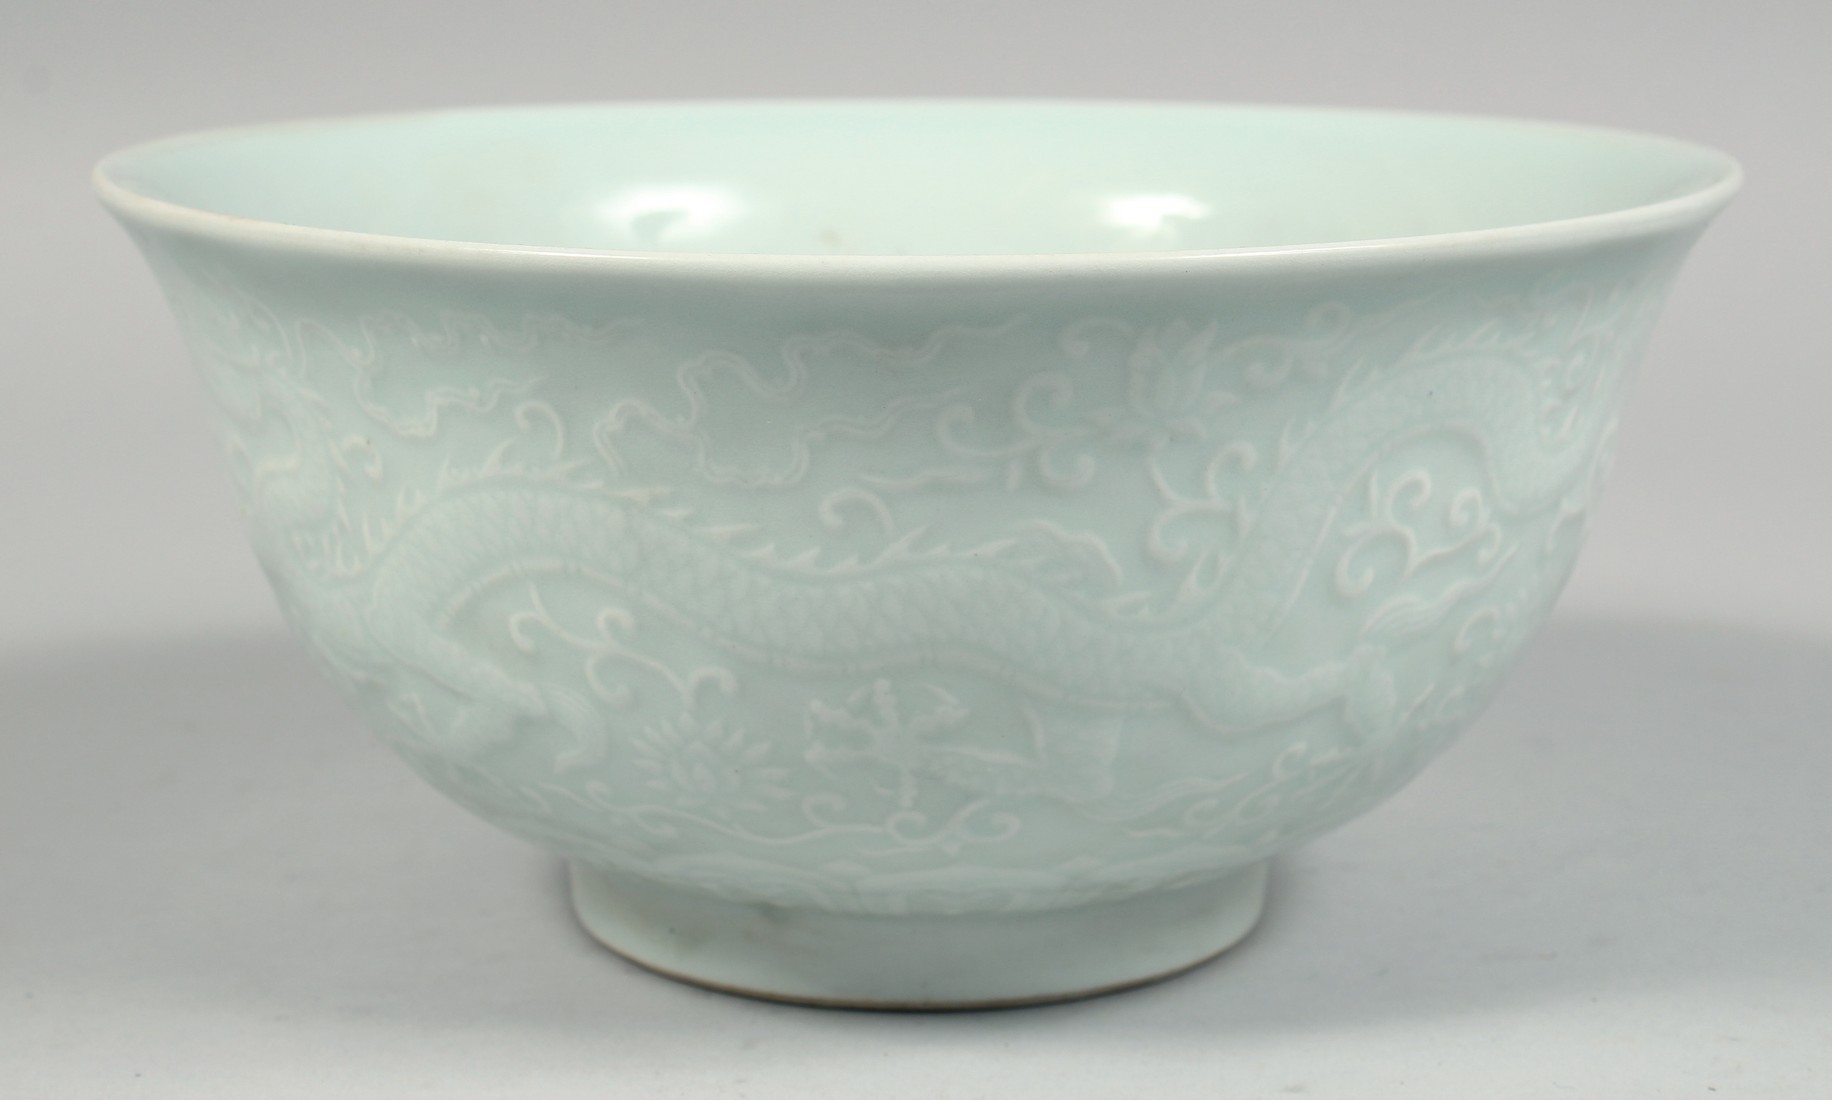 A CHINESE PALE CELADON PORCELAIN BOWL, the exterior with raised decoration depicting dragons and